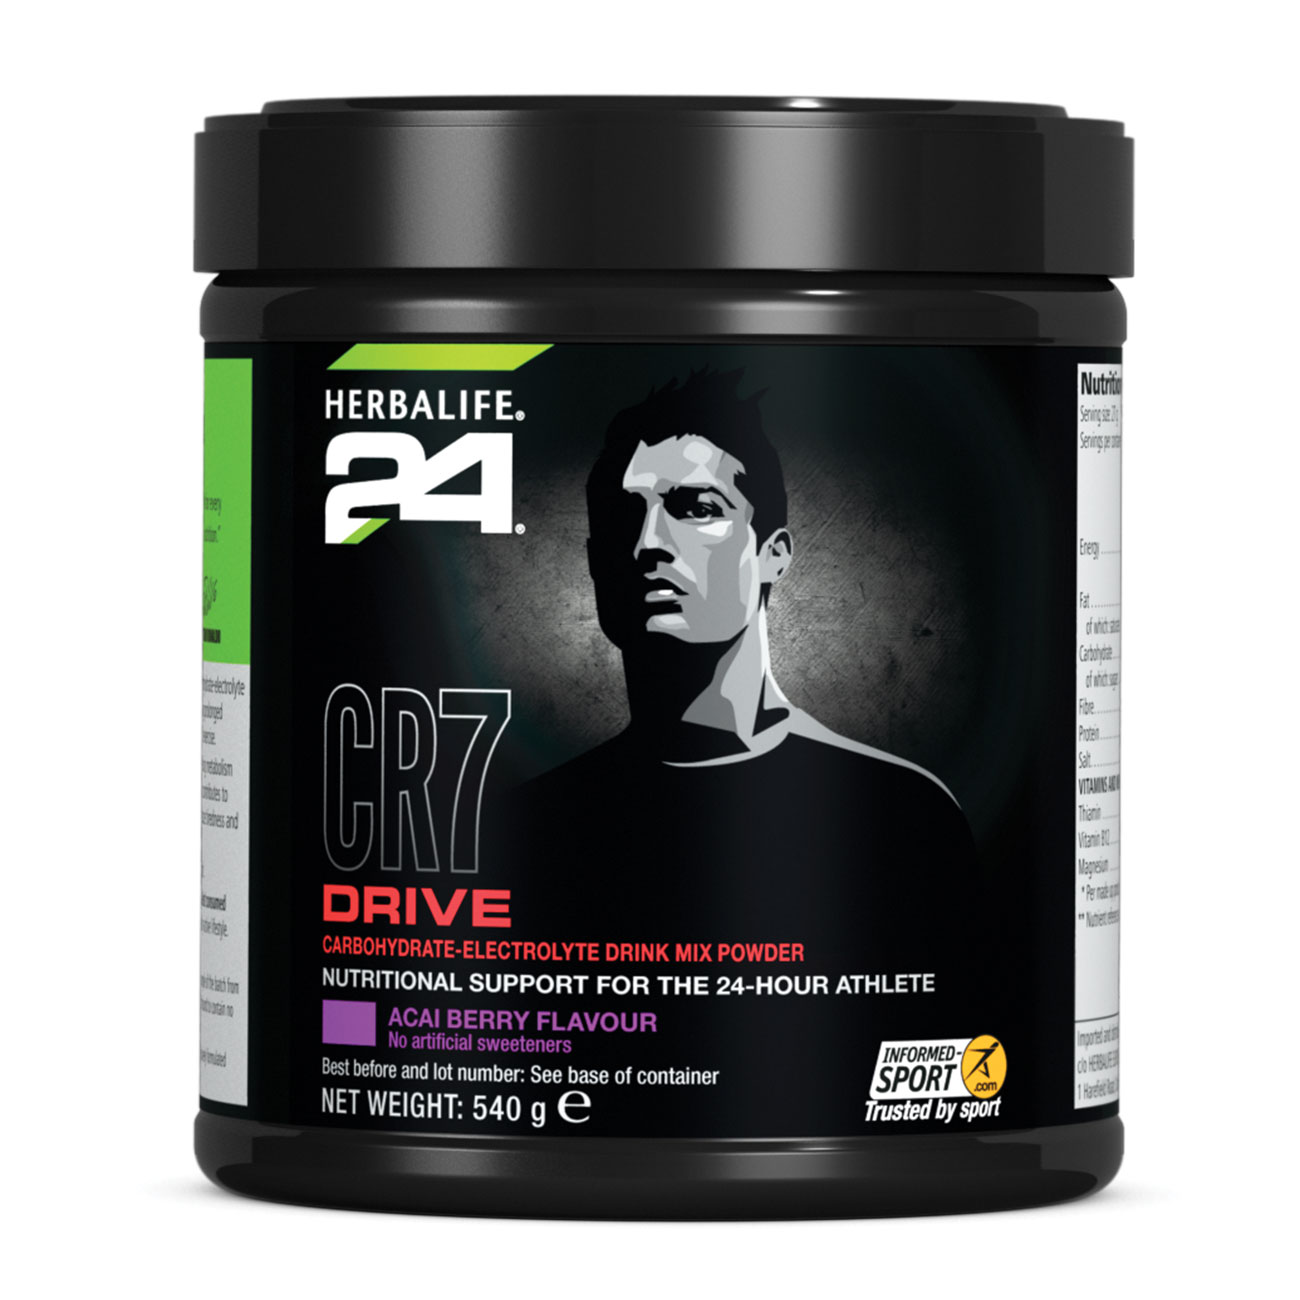 Herbalife24® CR7 Drive Sports Drink Acai Berry product shot